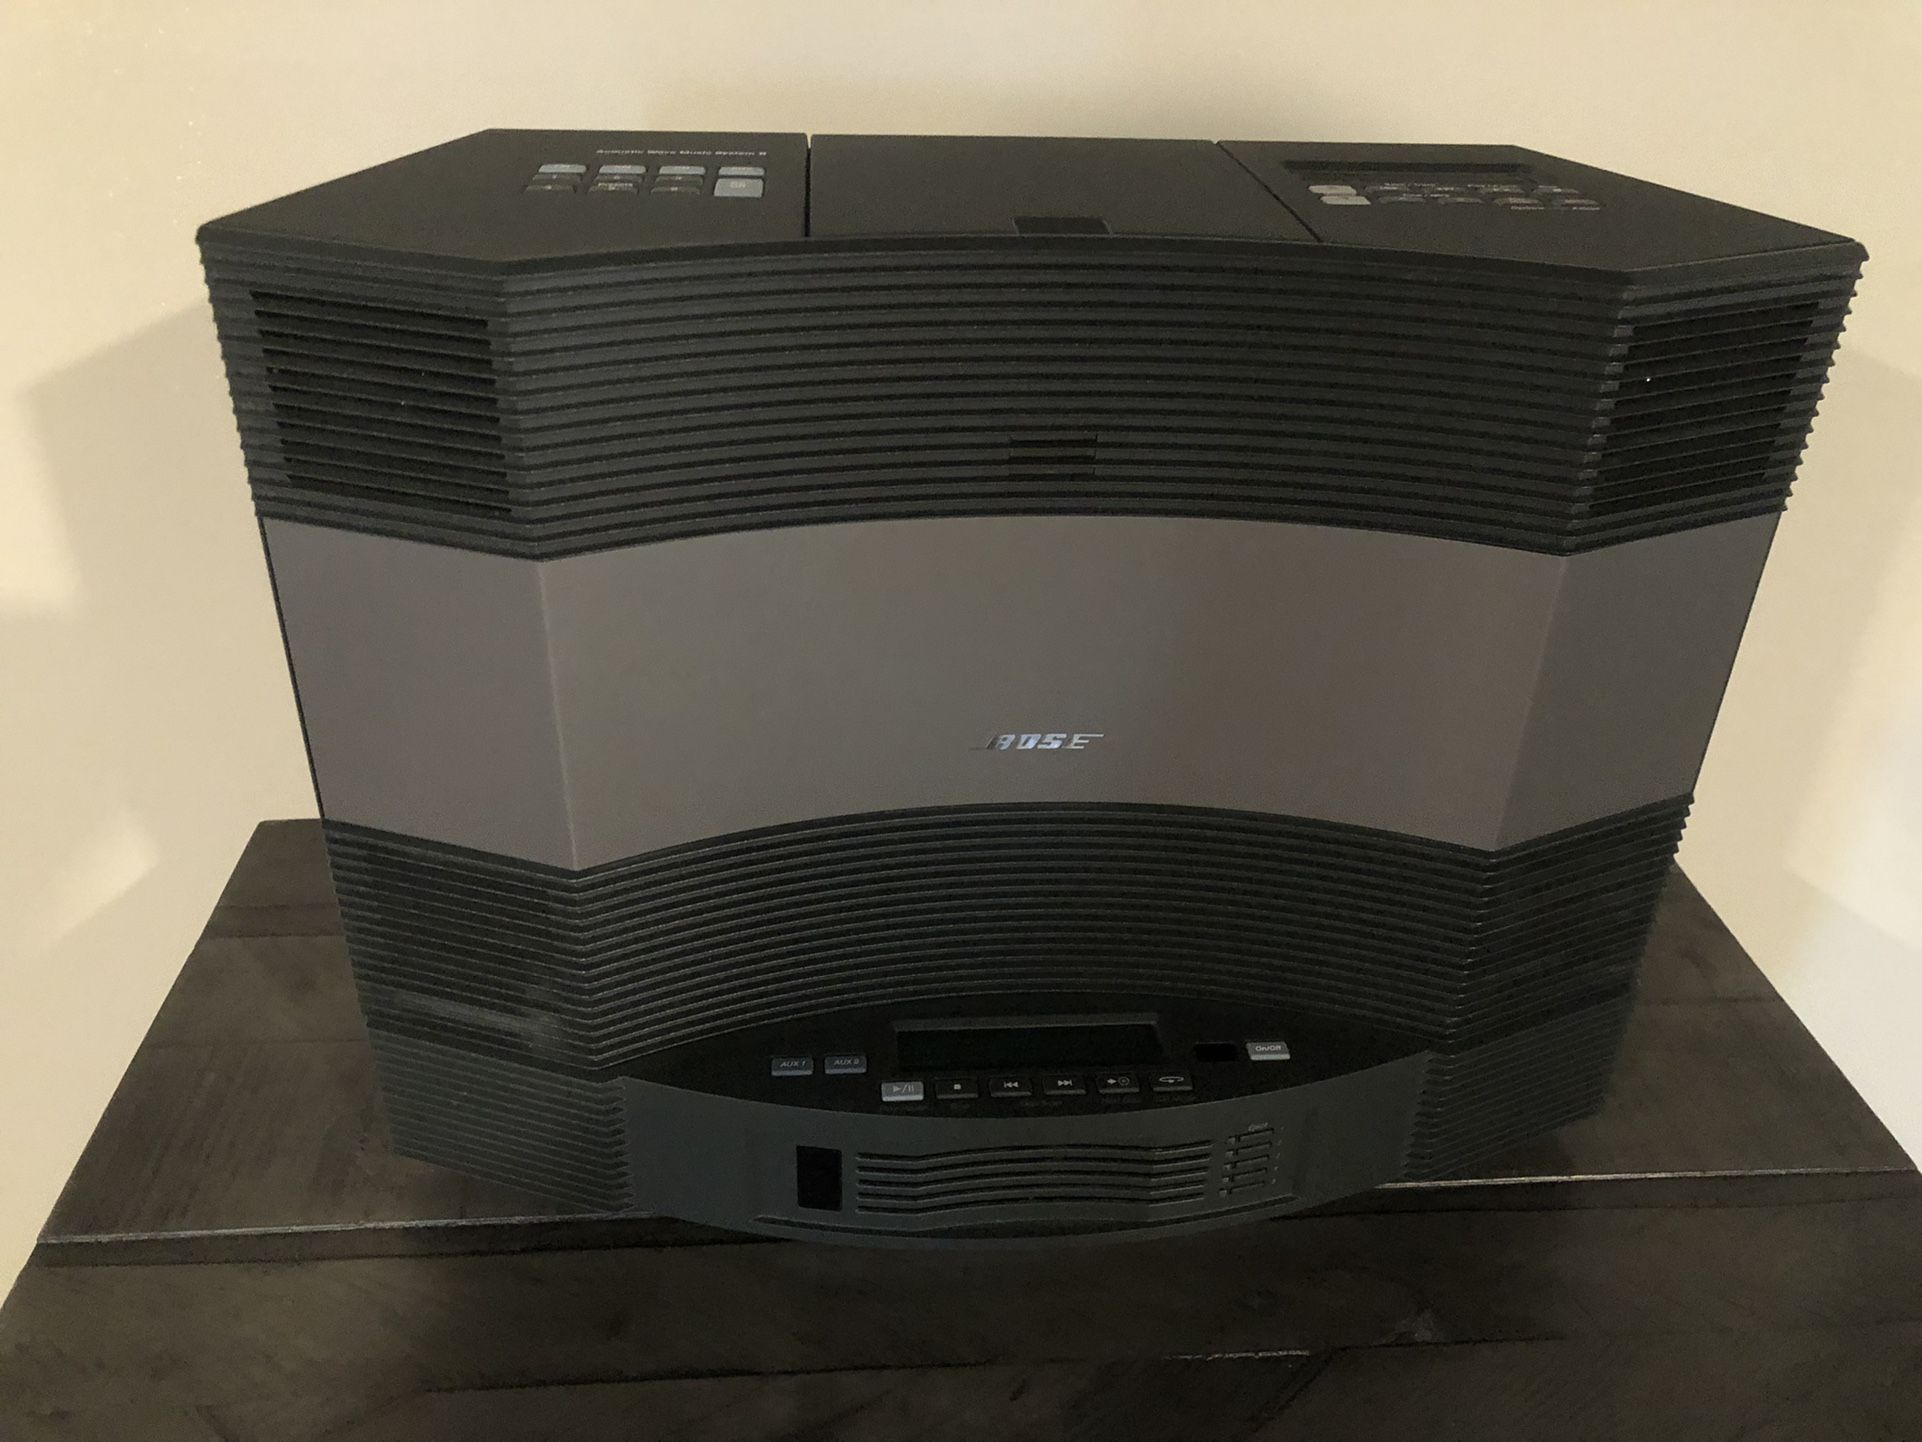 Bose acoustic wave music system